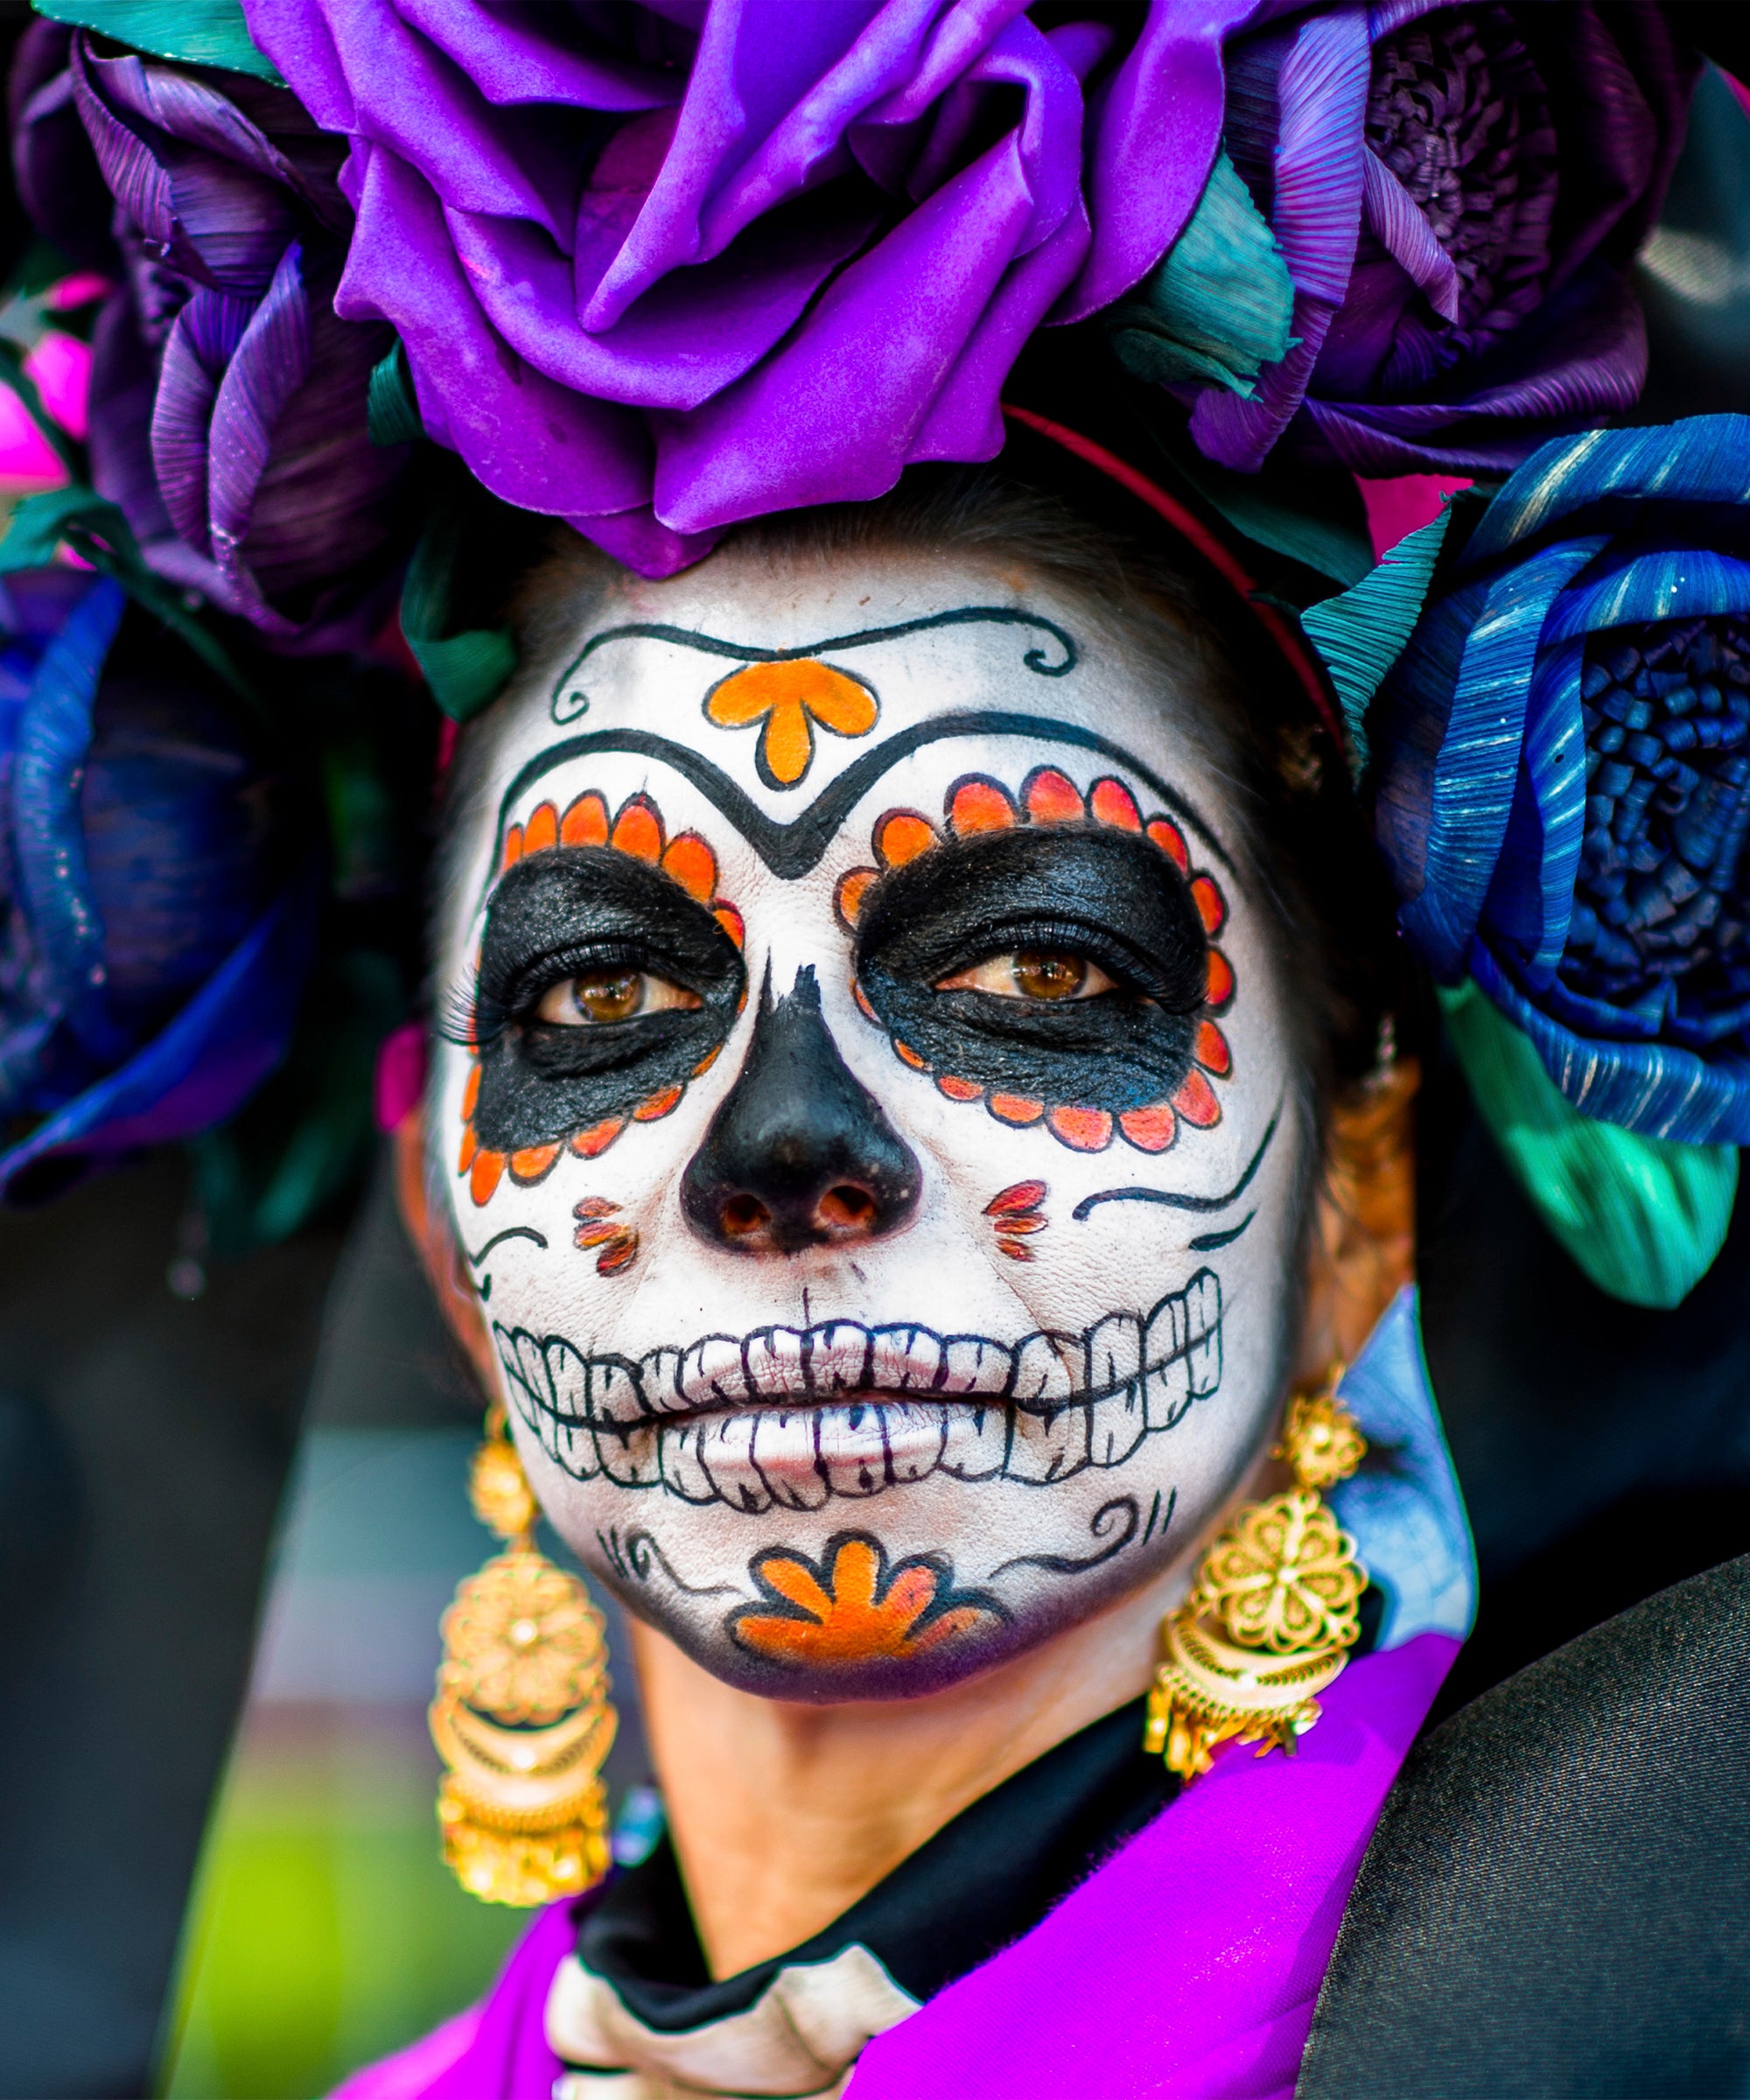 How To Wear Sugar Skull Makeup Without Being Offensive